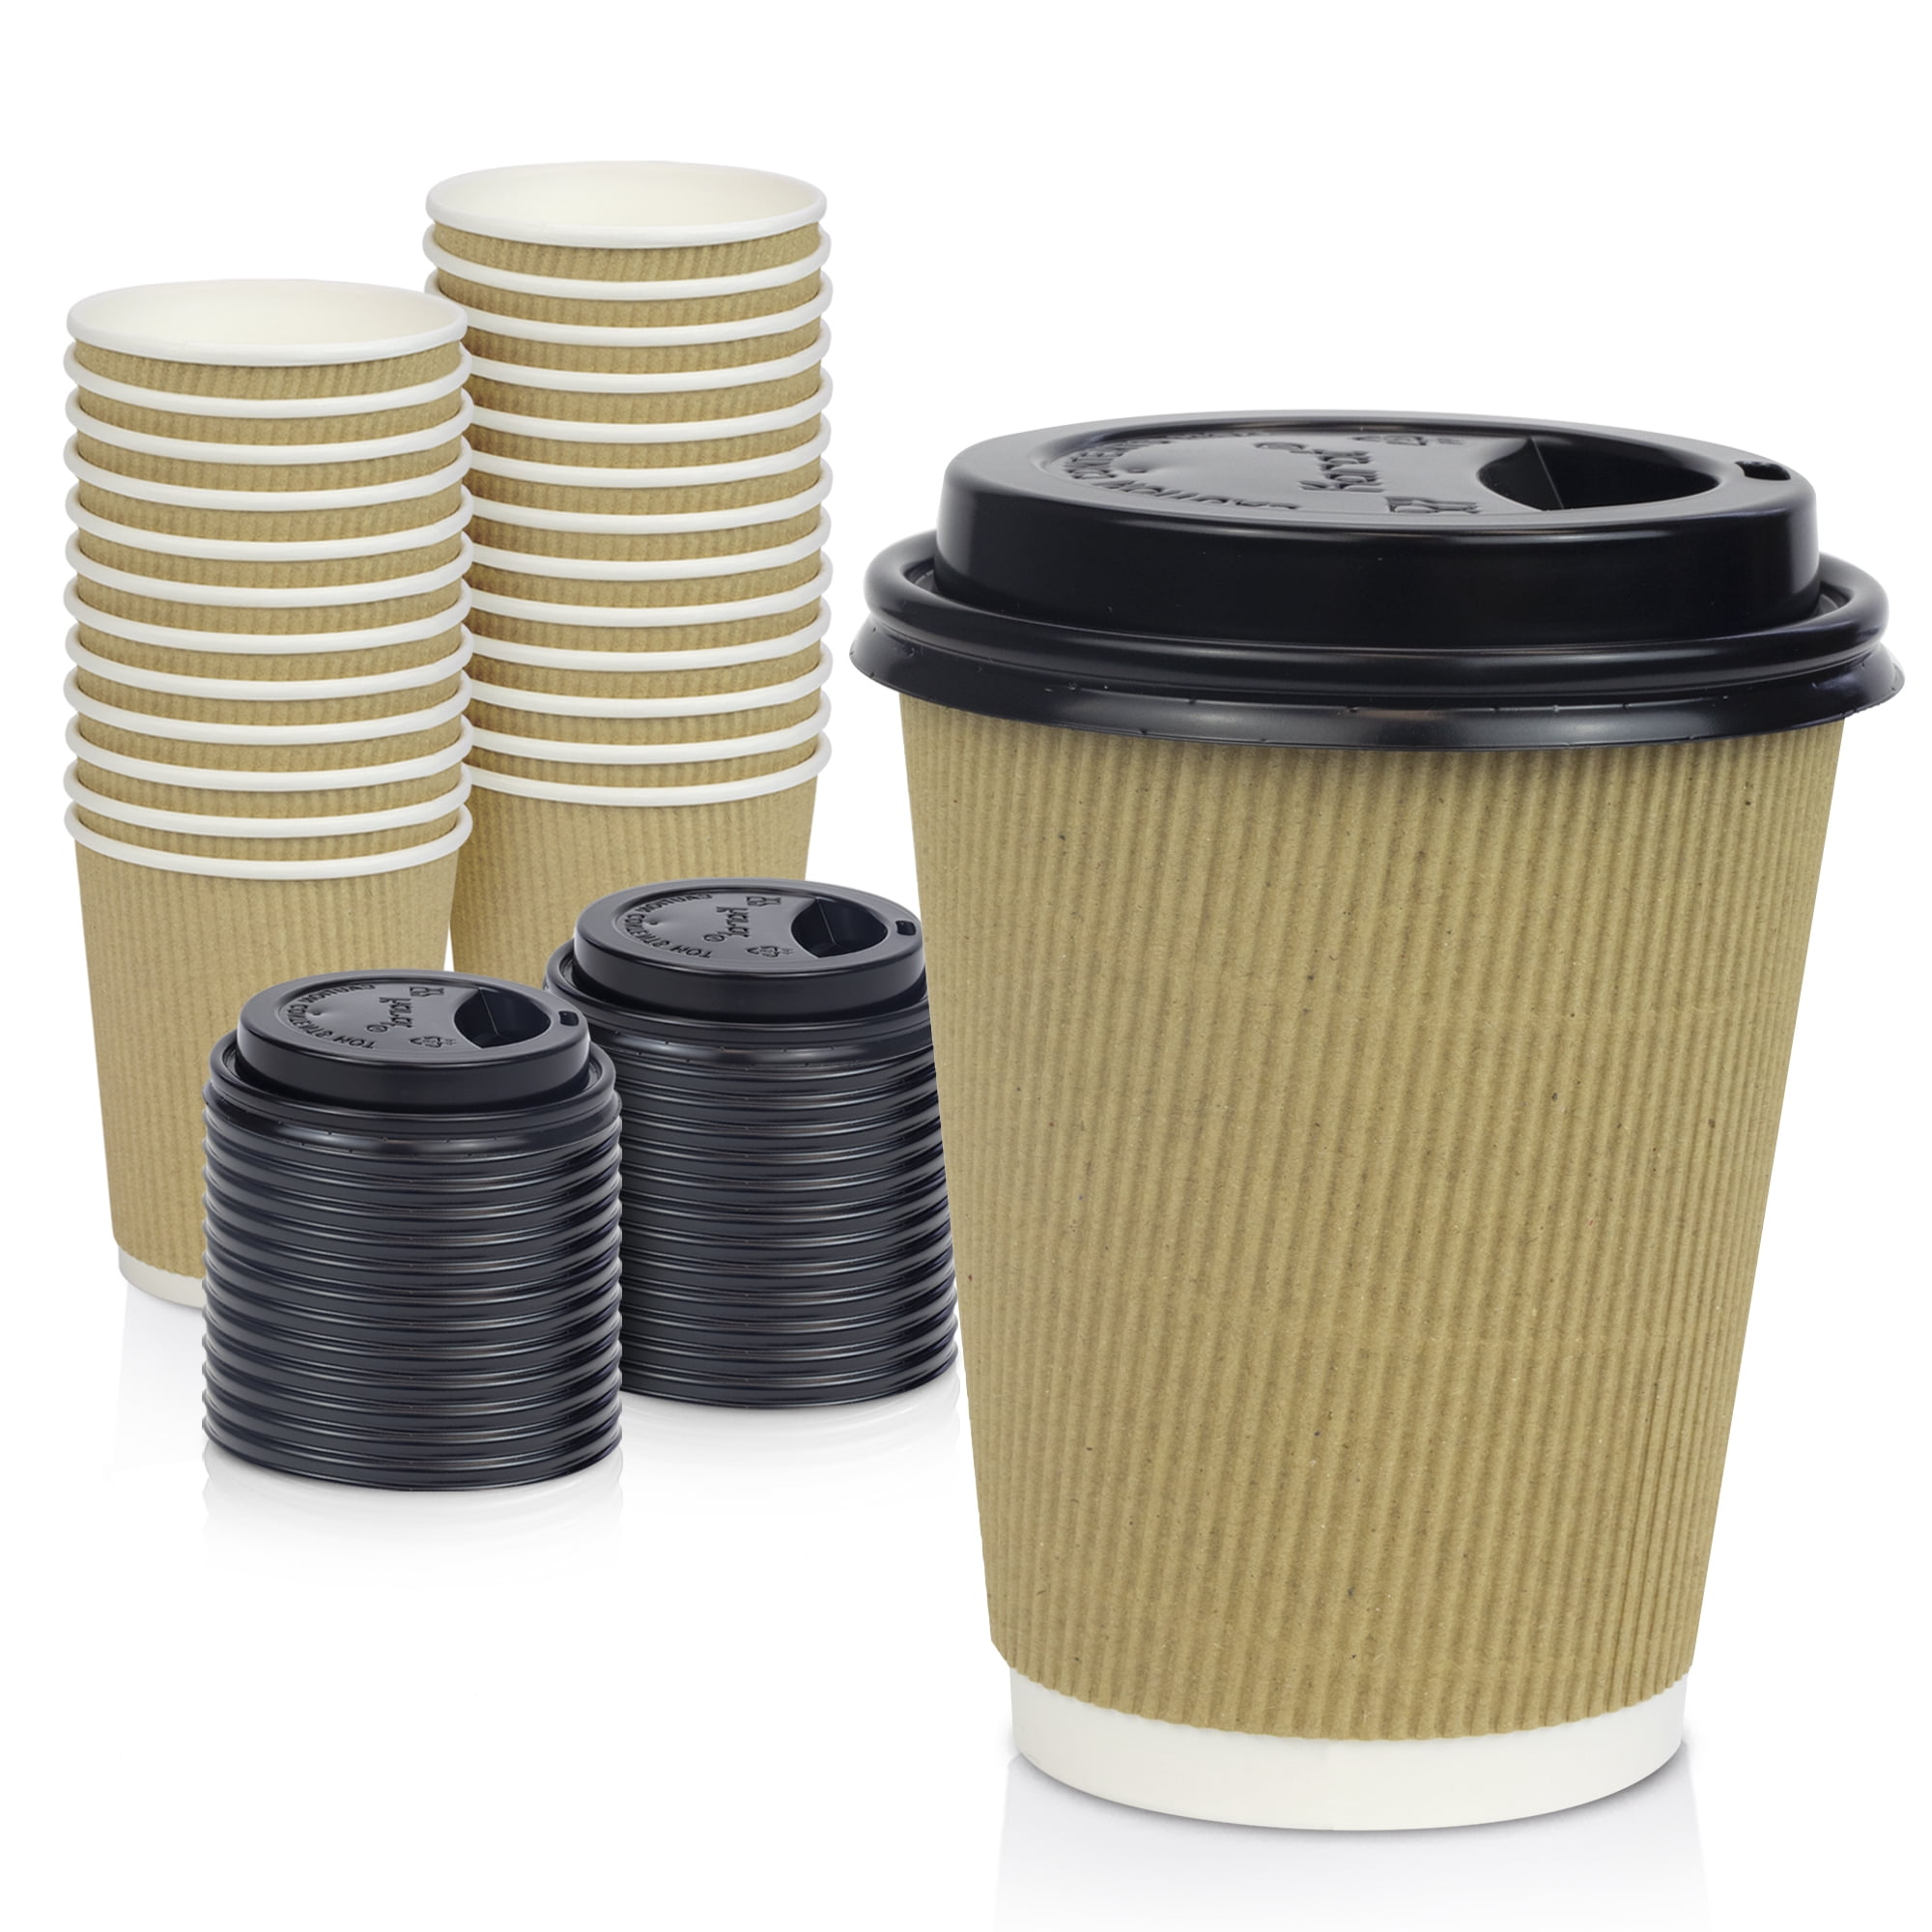 50 Sets - 12 oz.] Insulated Ripple Paper Hot Coffee Cups With Lids 